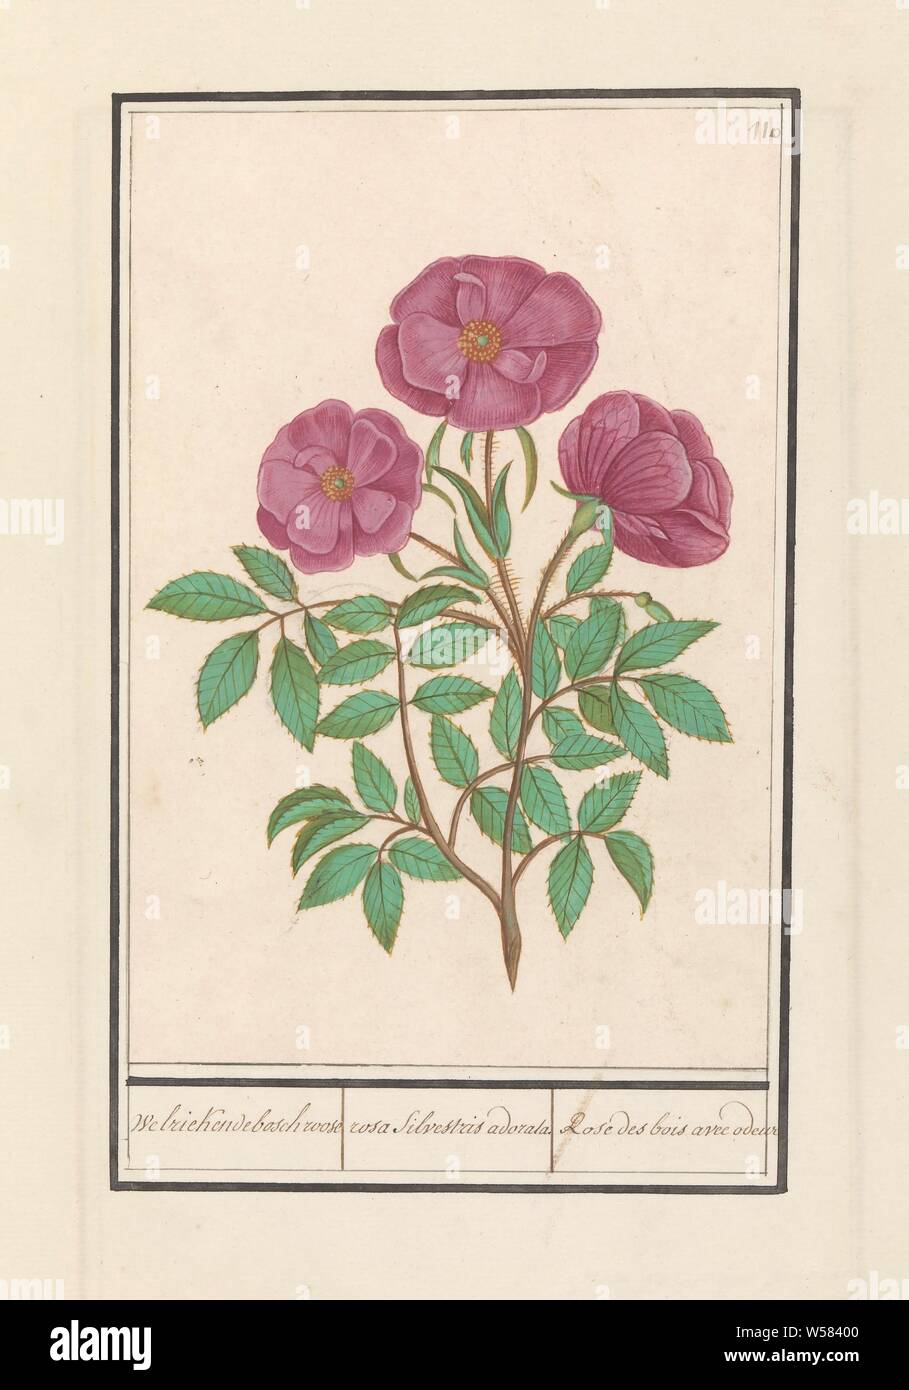 Wild rose (Rosa) Fragrant bosch roose / rosa silverstris adorata. / Rose  des bois avec odeur (title on object), Wild-scented rose. Numbered top  right: 110. Part of the second album with drawings